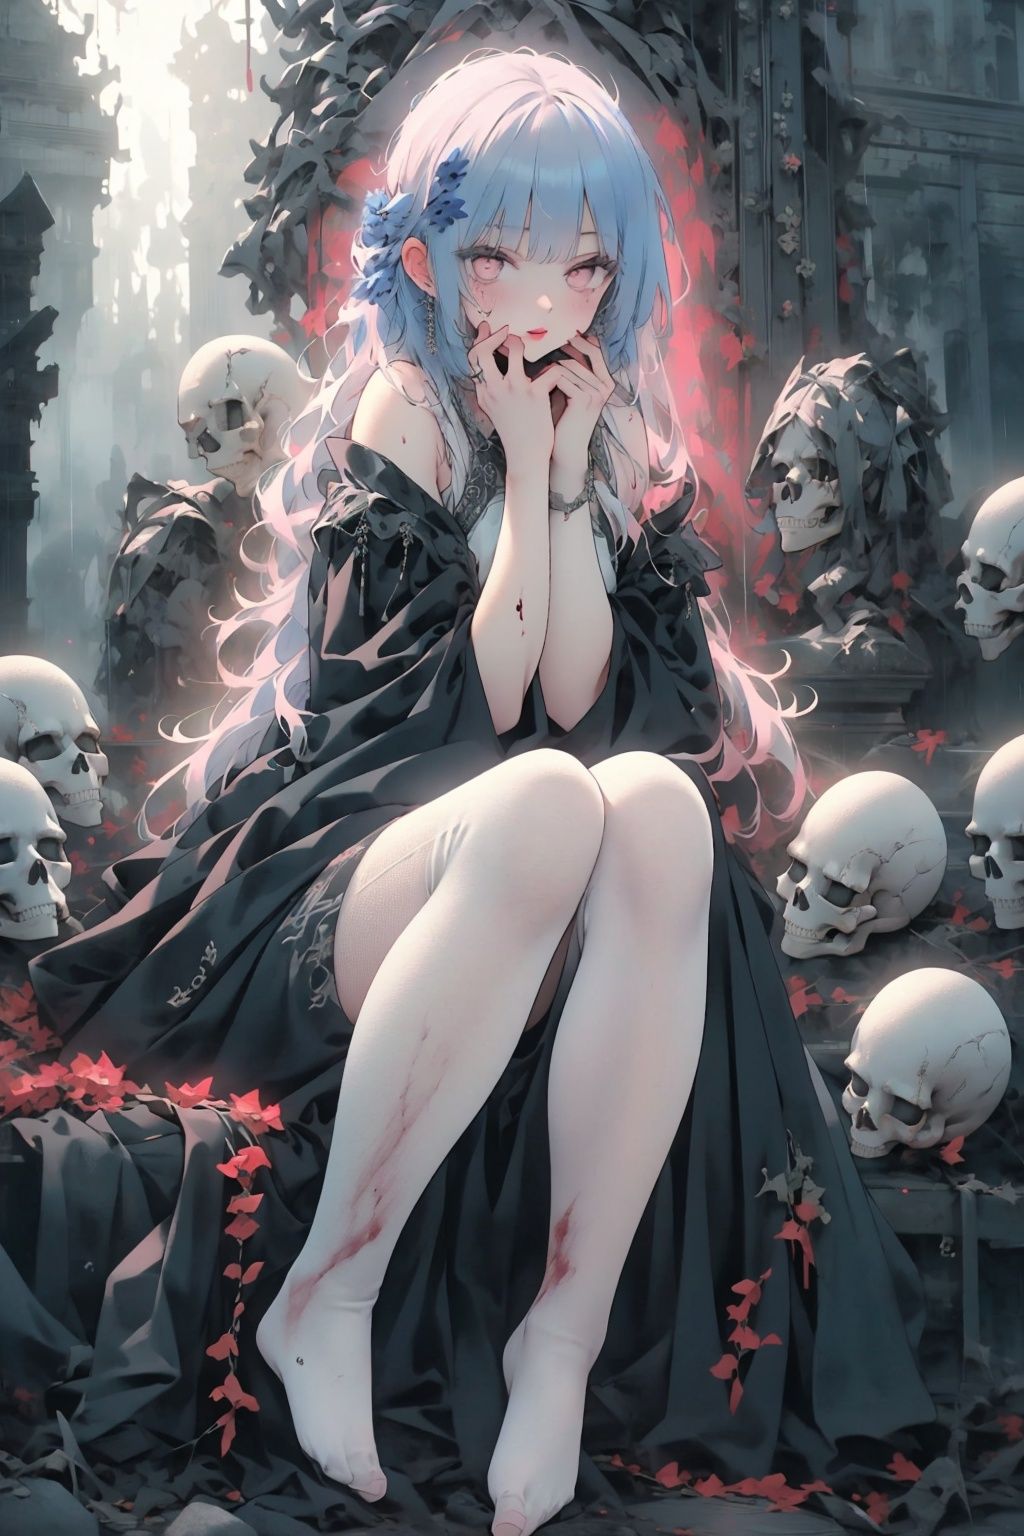  ((1girl,solo, alone, delicate face, cute, red eye pupil, pink eyelashes, red eye shadow, pink lips,excellent face,expression is enchanting,)), Character close-up,
leaning against the ruins, with a floating skeleton in the background.(white stockings),her posture is seductive, her hand is holding her face, and there is a flicker of evil energy runes in the background, blood mist filled, and soft light. No shoes,My feet are covered in bones. Skeletons, many skeletons. Official art, unit 8 k wallpaper, ultra detailed, beautiful and aesthetic, masterpiece, best quality, extremely detailed, dynamic angle, paper skin, radius, iuminosity, cowboyshot, the most beautiful form of Chaos, elegant, a brutalist designed, visual colors, romanticism, by James Jean, roby dwi antono, cross tran, francis bacon, Michael mraz, Adrian ghenie, Petra cortright, Gerhard richter, Takato yamamoto, ashley wood, atmospheric, ((late at night,dark)), light rain,dark, limited palette, contrast,(((Cornflower))), cornflower, cornflower,vines, forest, lens flare, hdr, Tyndall effect,damp,wet,cold theme, broken wall, aqua theme, floating hair, high detail, nayutaren, Nyarly